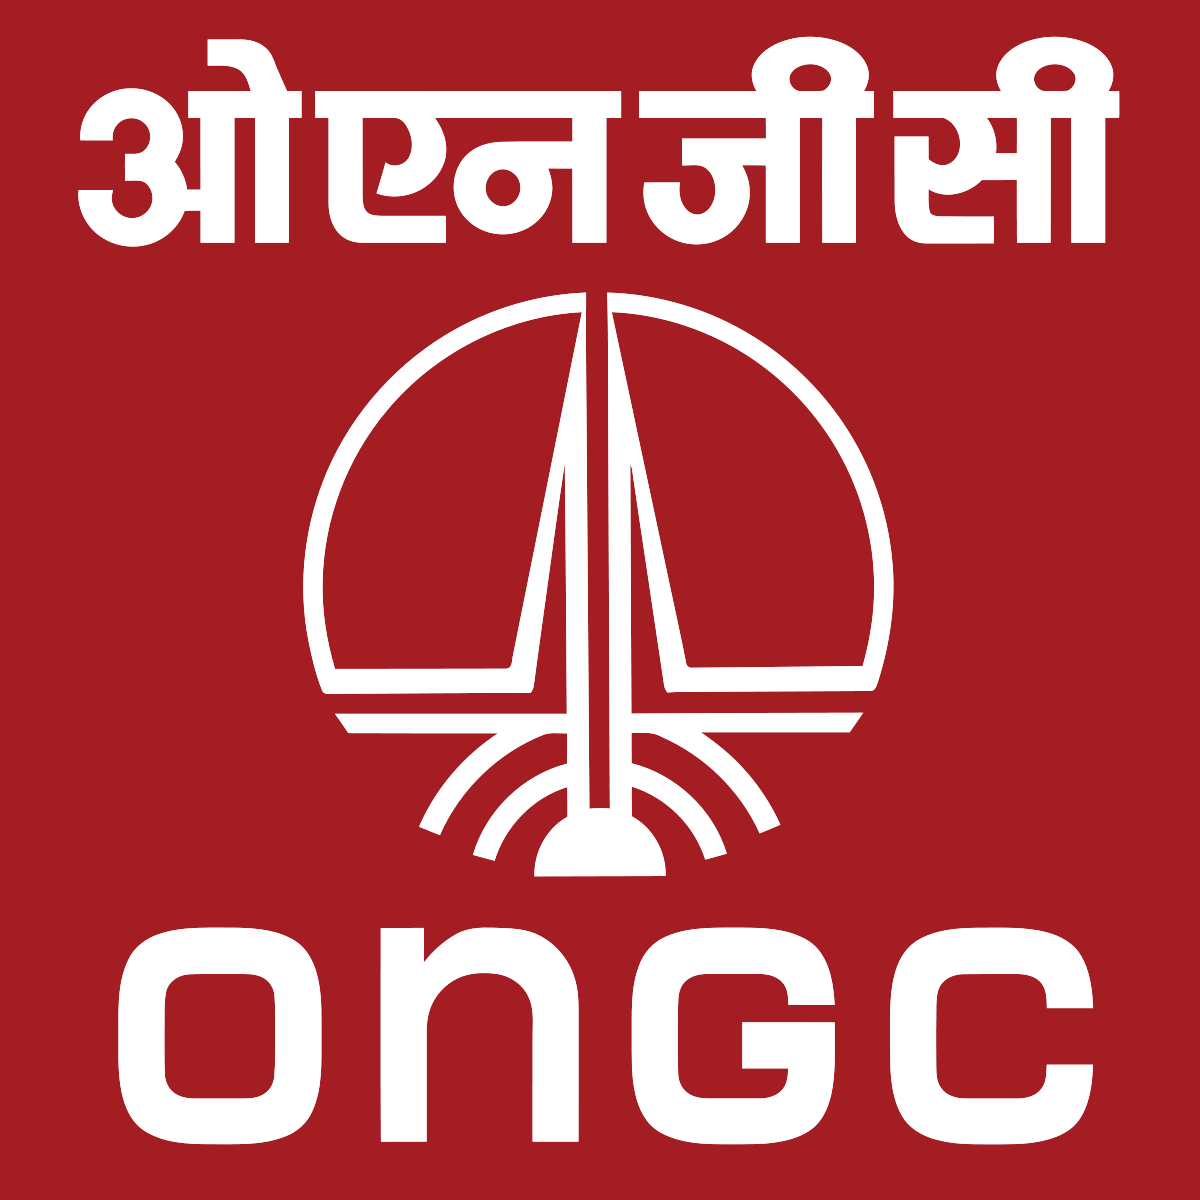 Oil Co Logo - Oil and Natural Gas Corporation